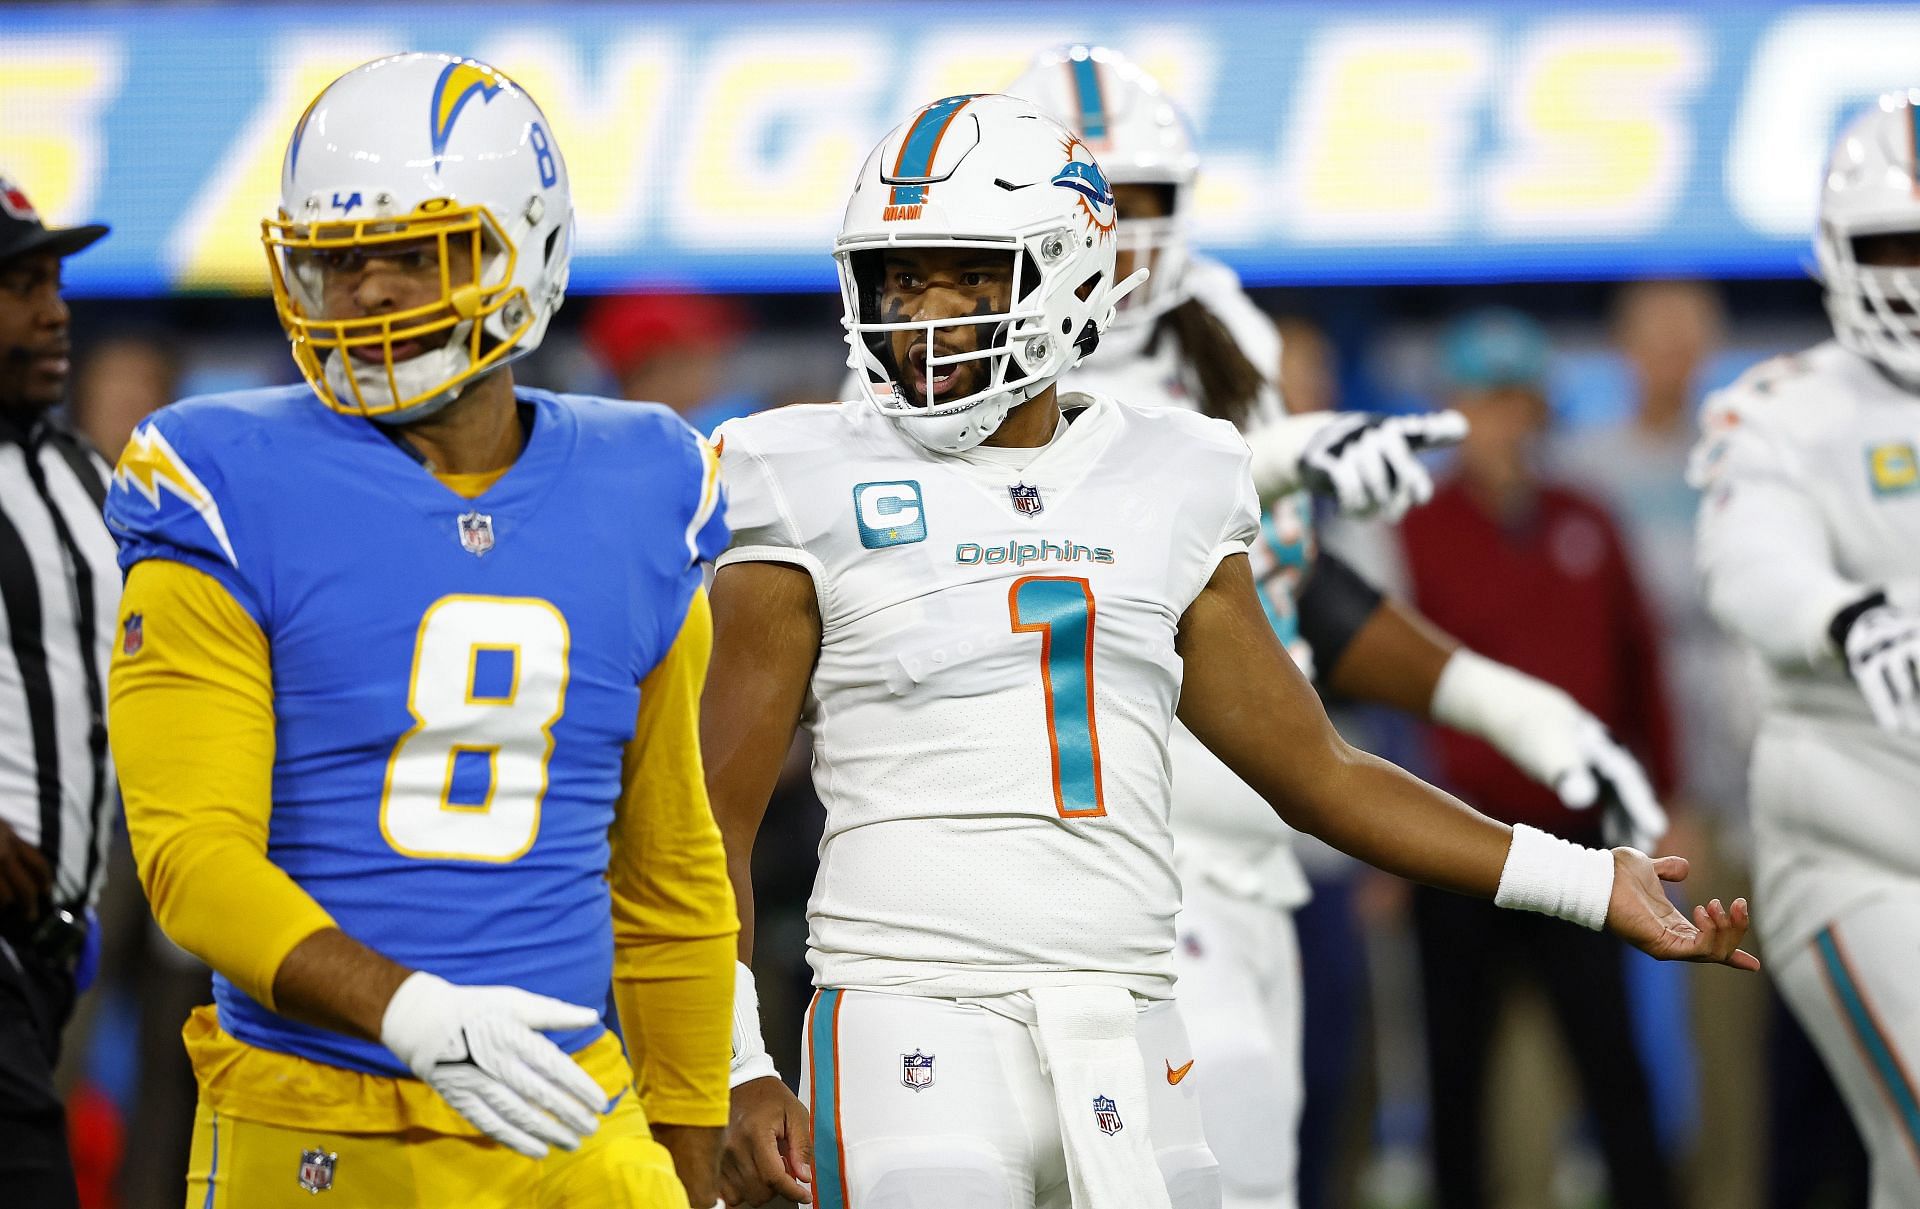 Miami Dolphins vs. Los Angeles Chargers